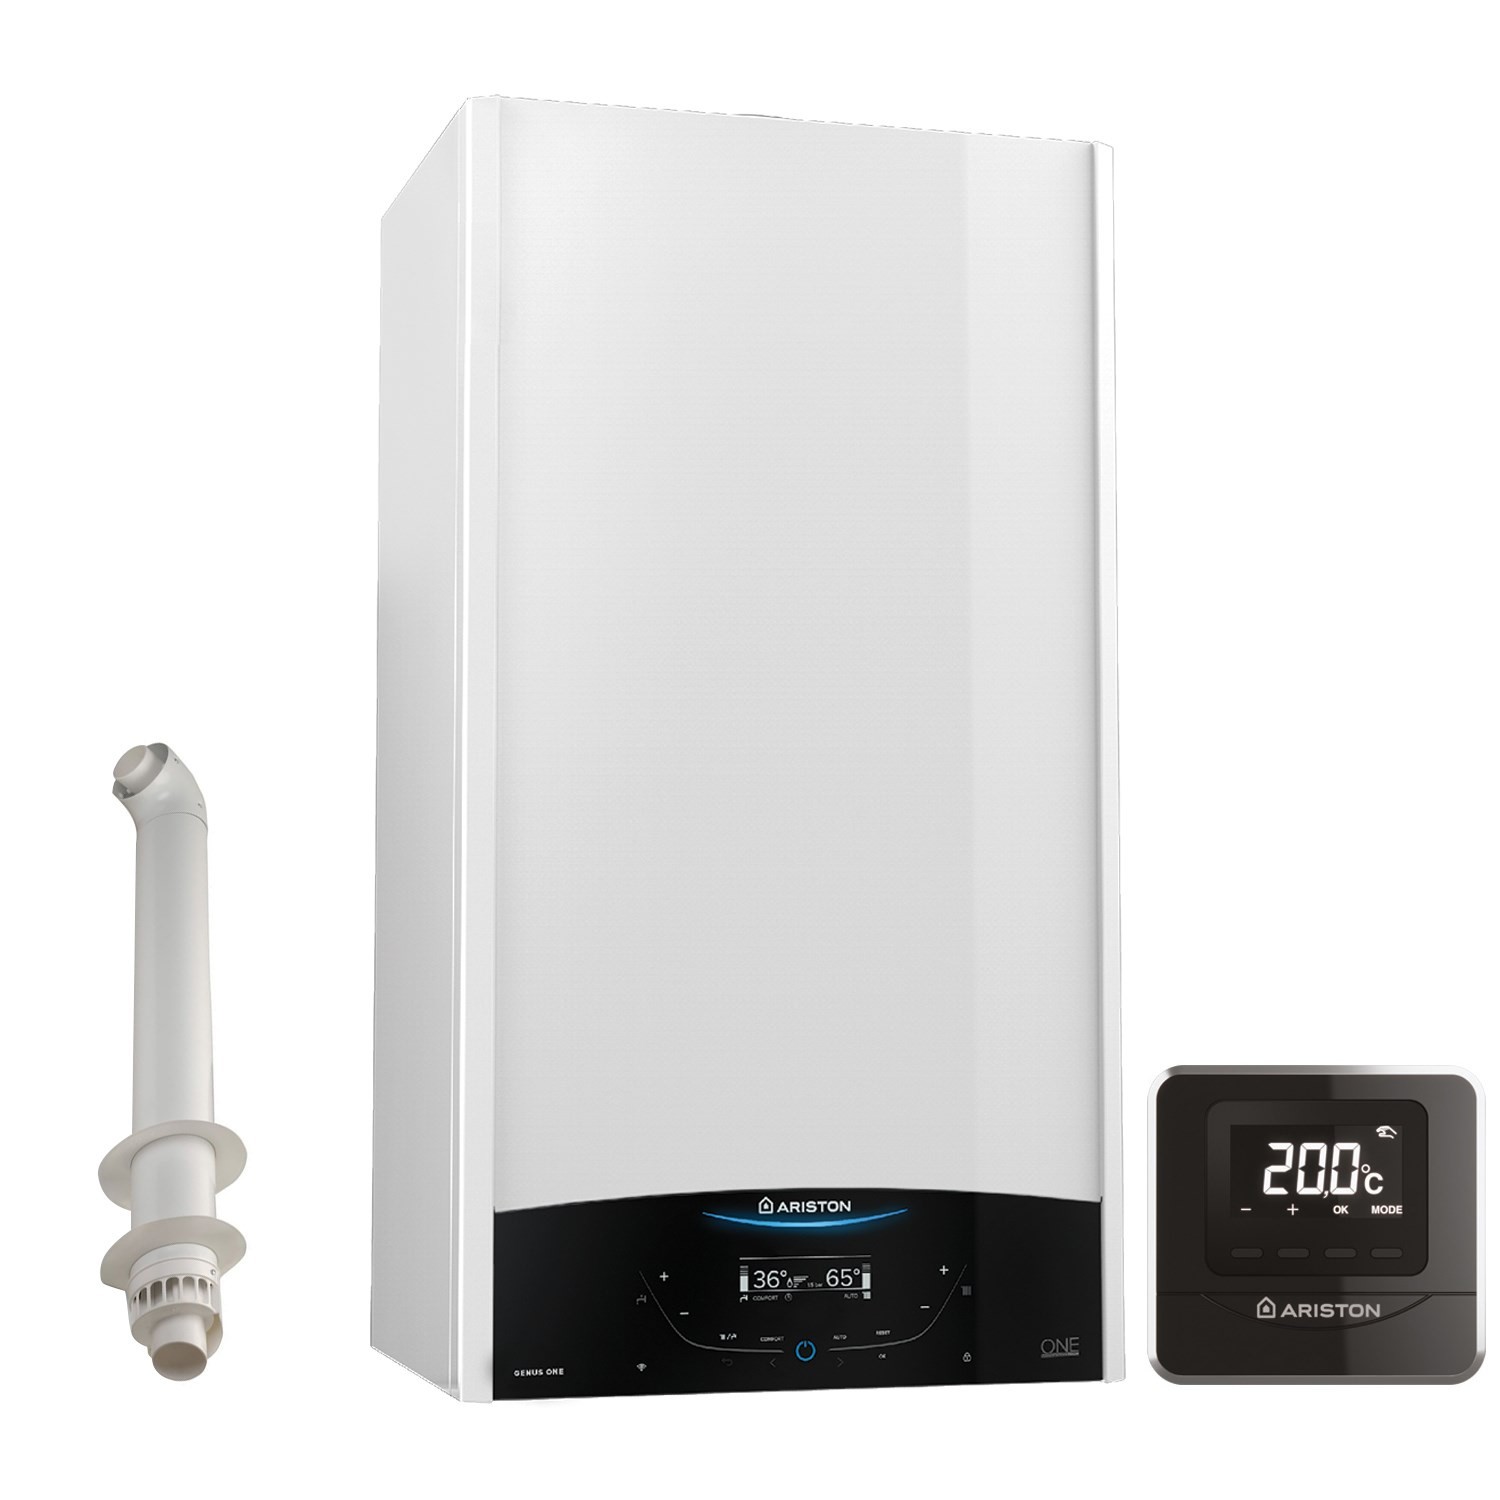 Ariston Genus One Net 35 Kw A+ Combi Boiler with Alexa WiFi with Free Cube R Net and Horizontal Flue